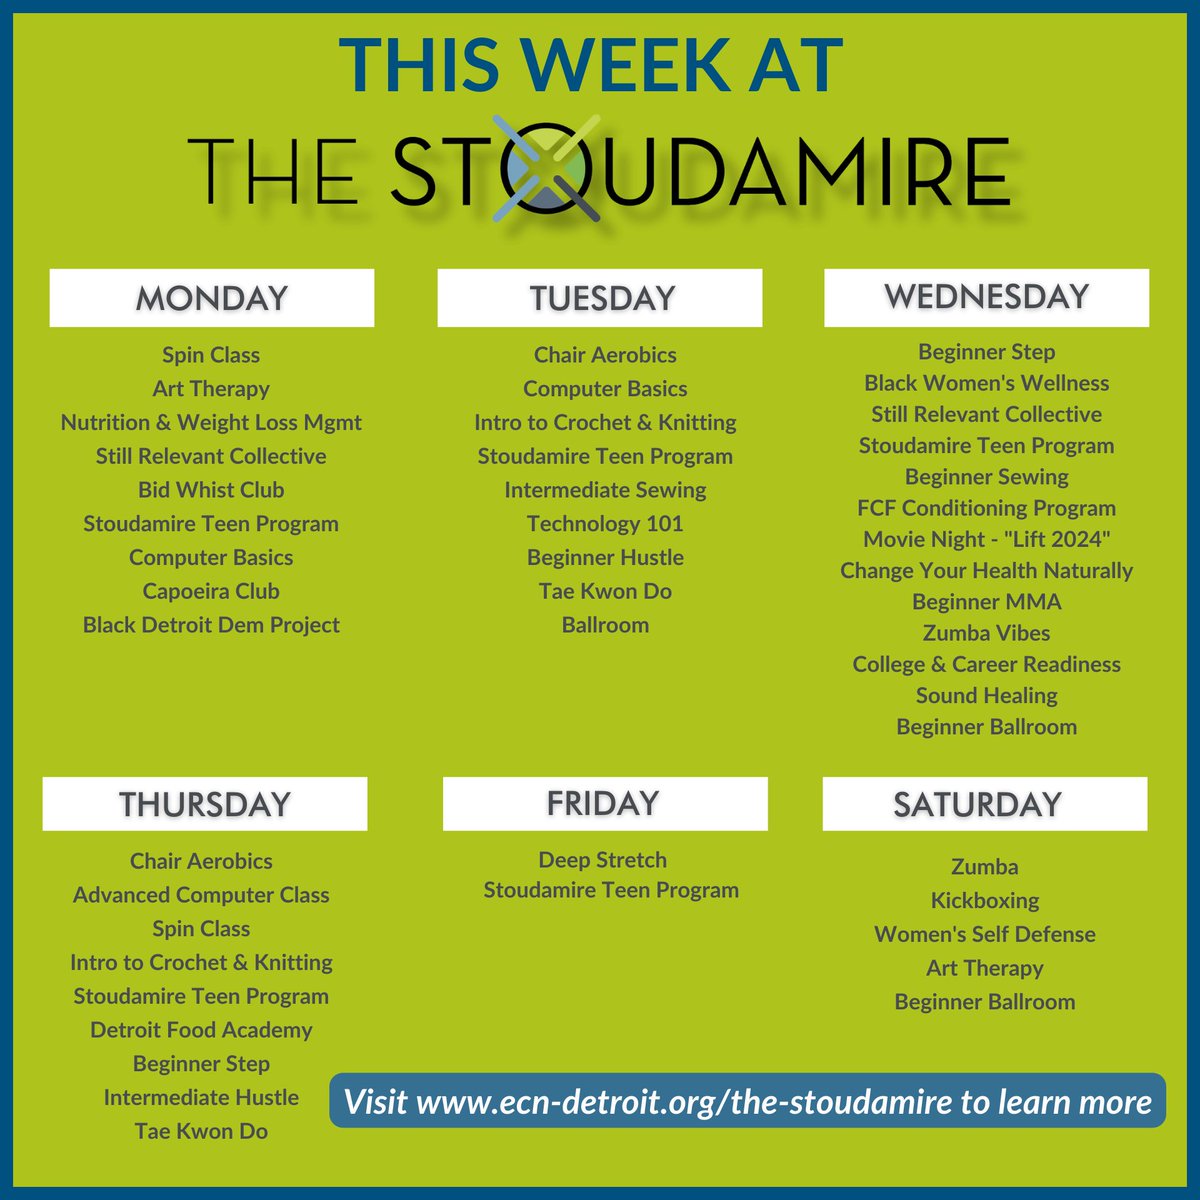 Check us out this week at The Stoudamire! 

#LiveWell #PlayWell #BeWell